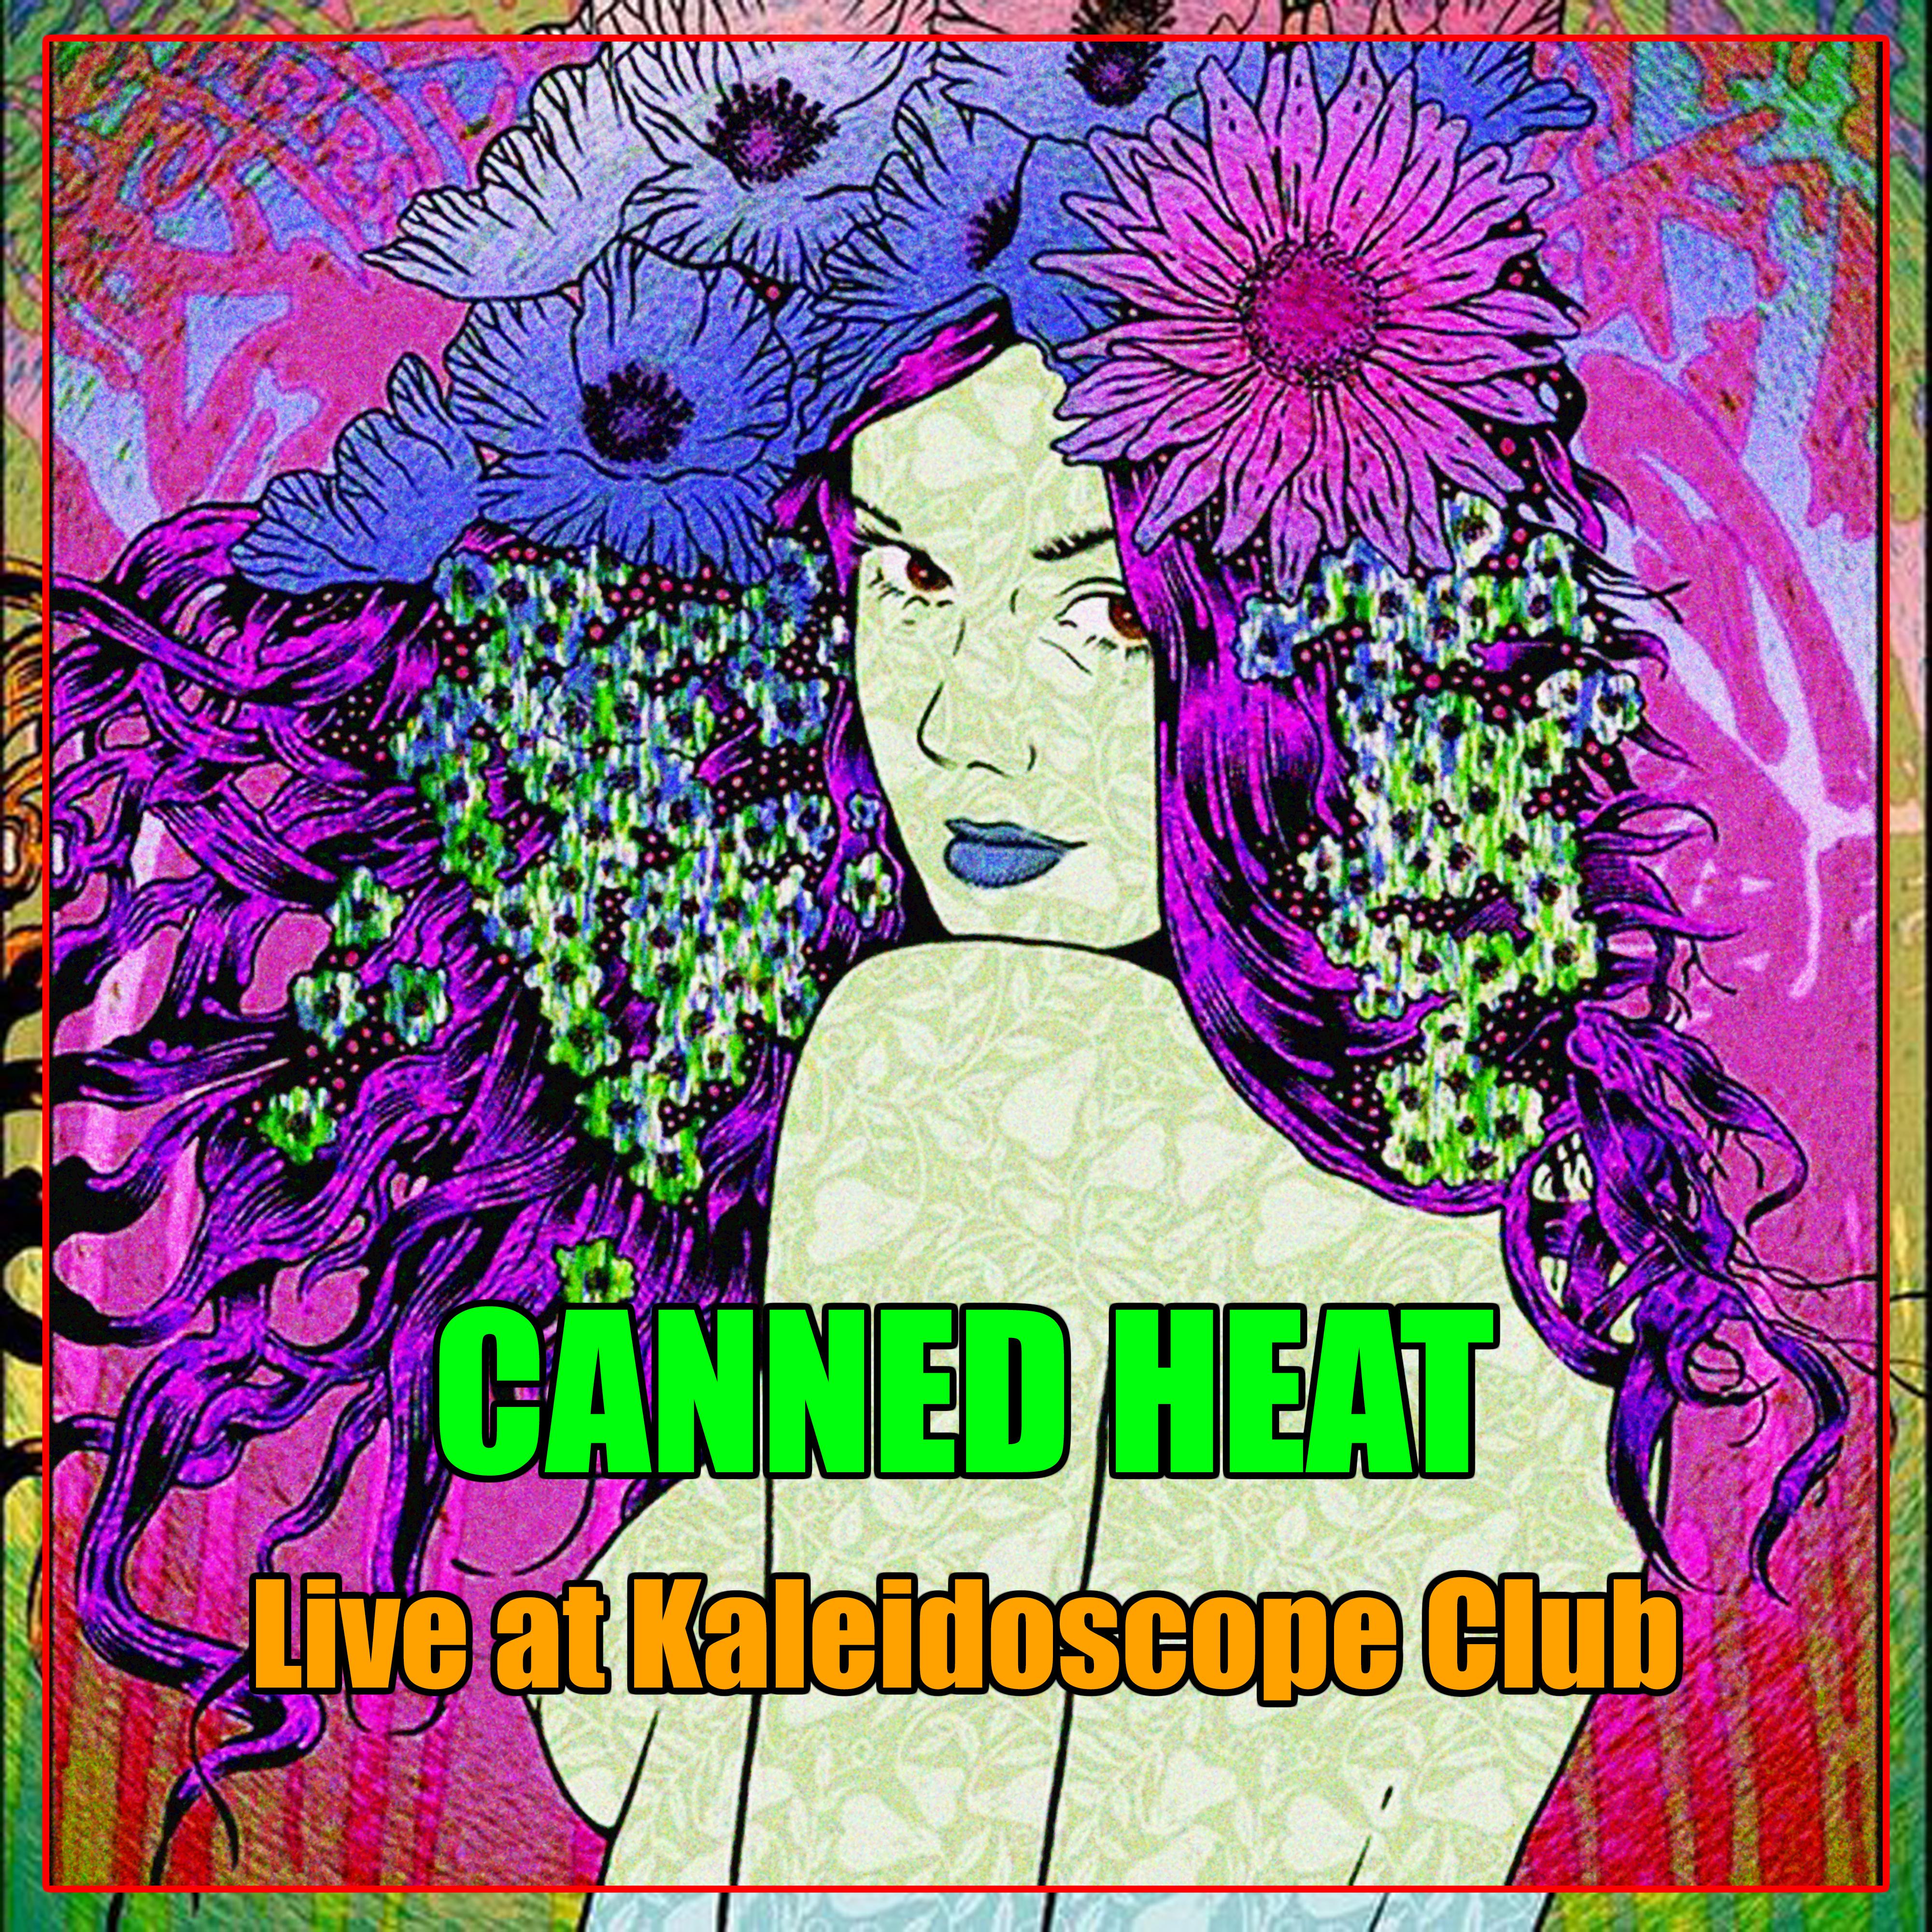 Canned Heat - Live at Kaleidoscope Club